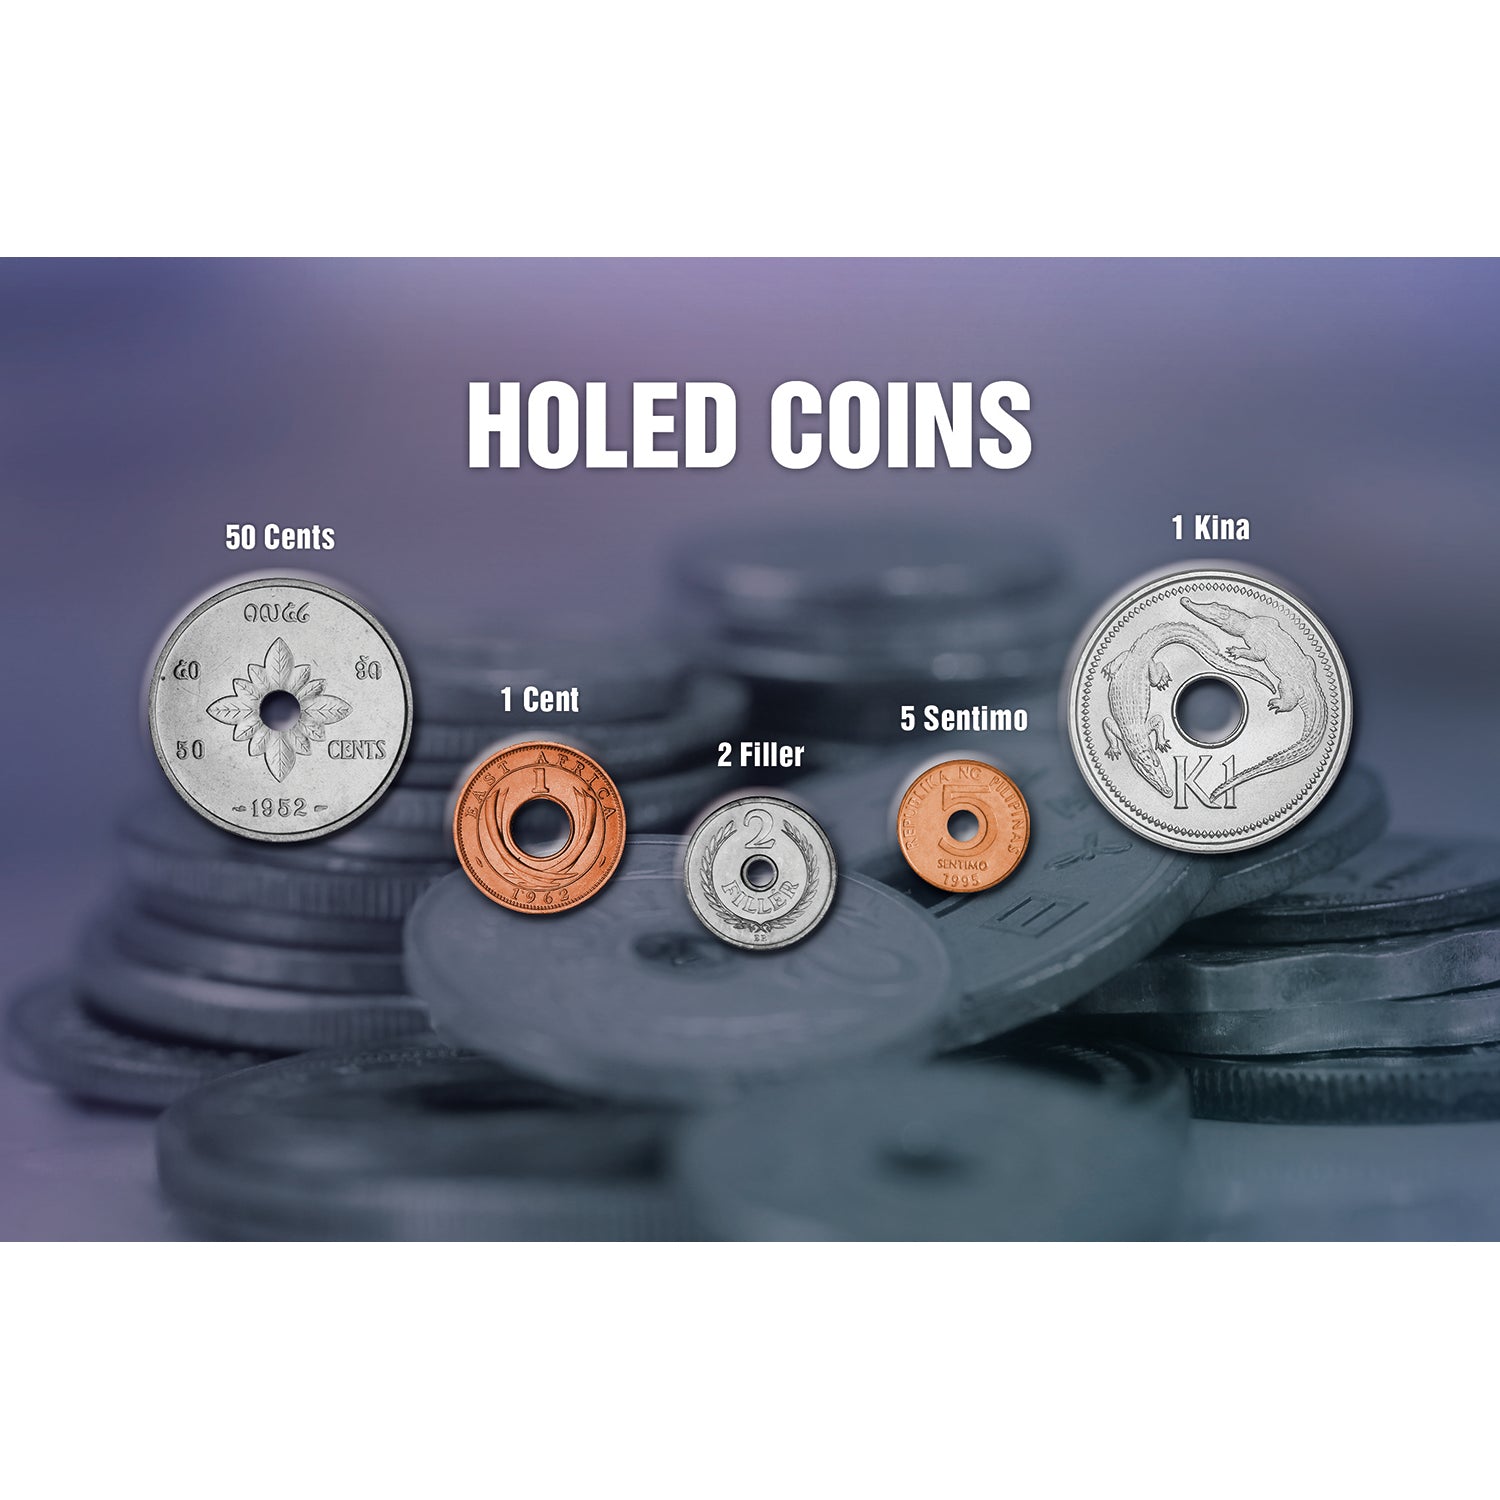 The Five - Holed Coins